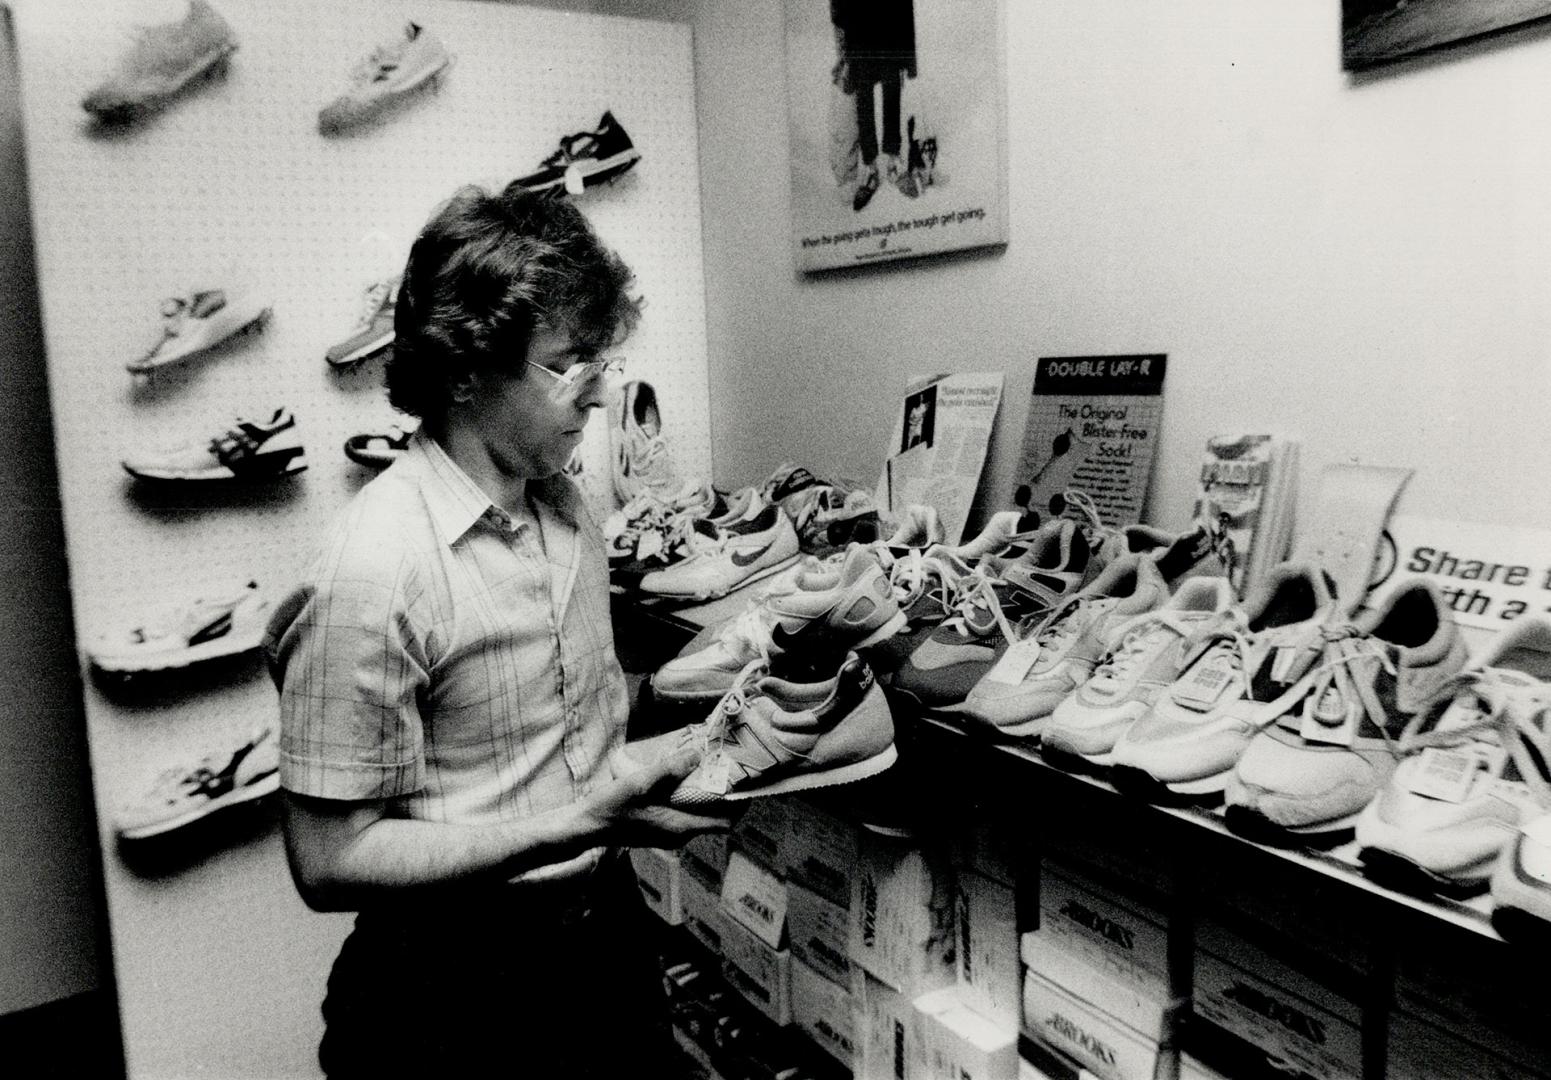 Bob Marcotte, assistant manager of The Runner's Shop on Bloor St